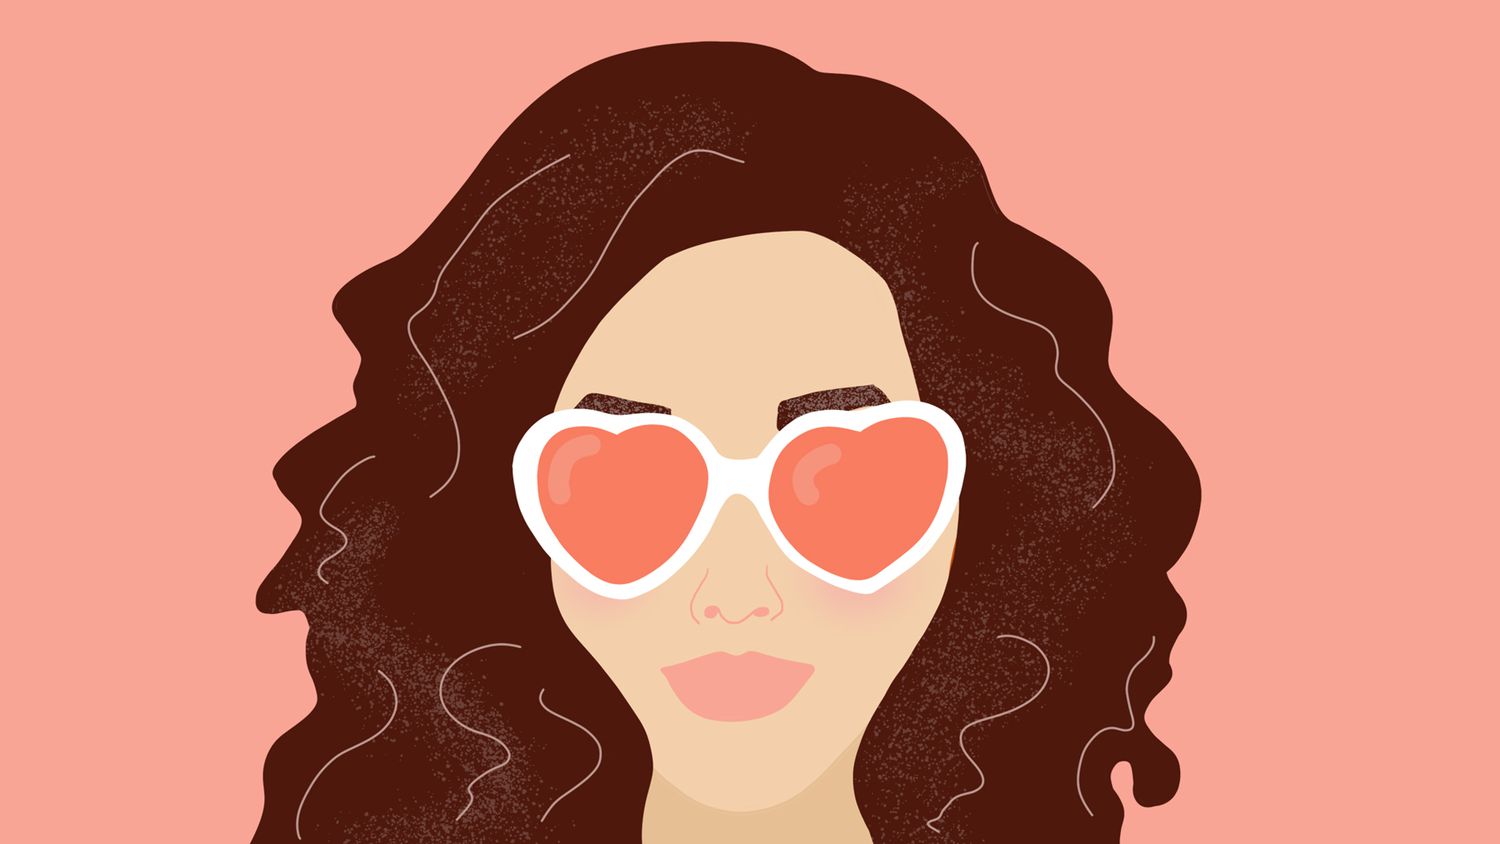 illustration of woman with curly hair